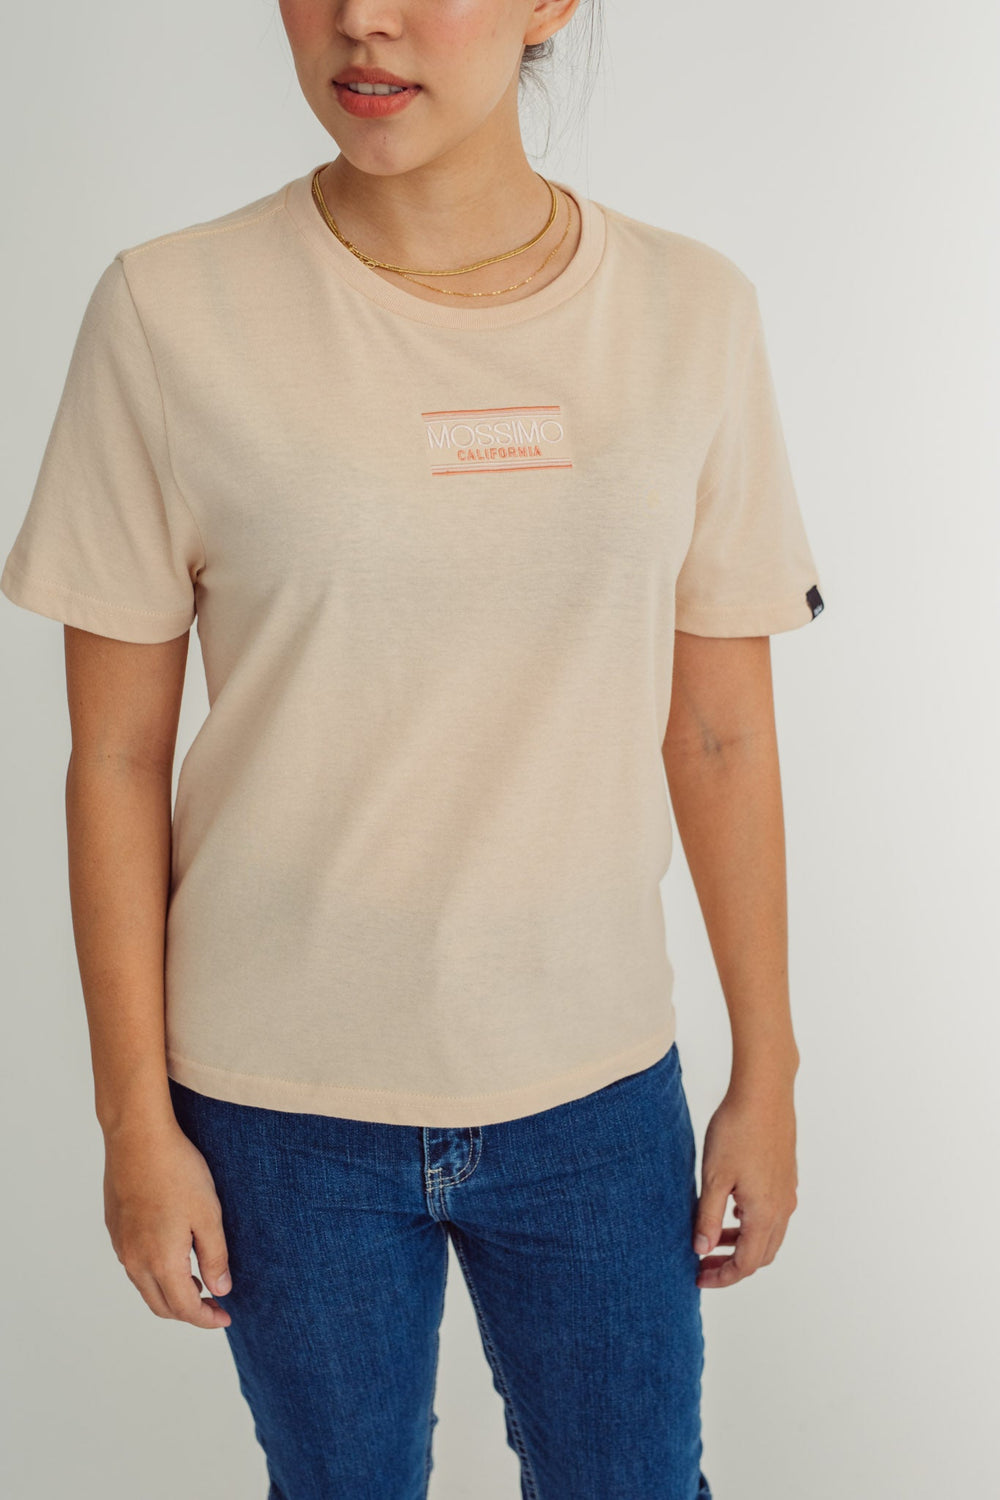 Ivory Cream with Small Branding Embroidery Comfort Fit Tee - Mossimo PH